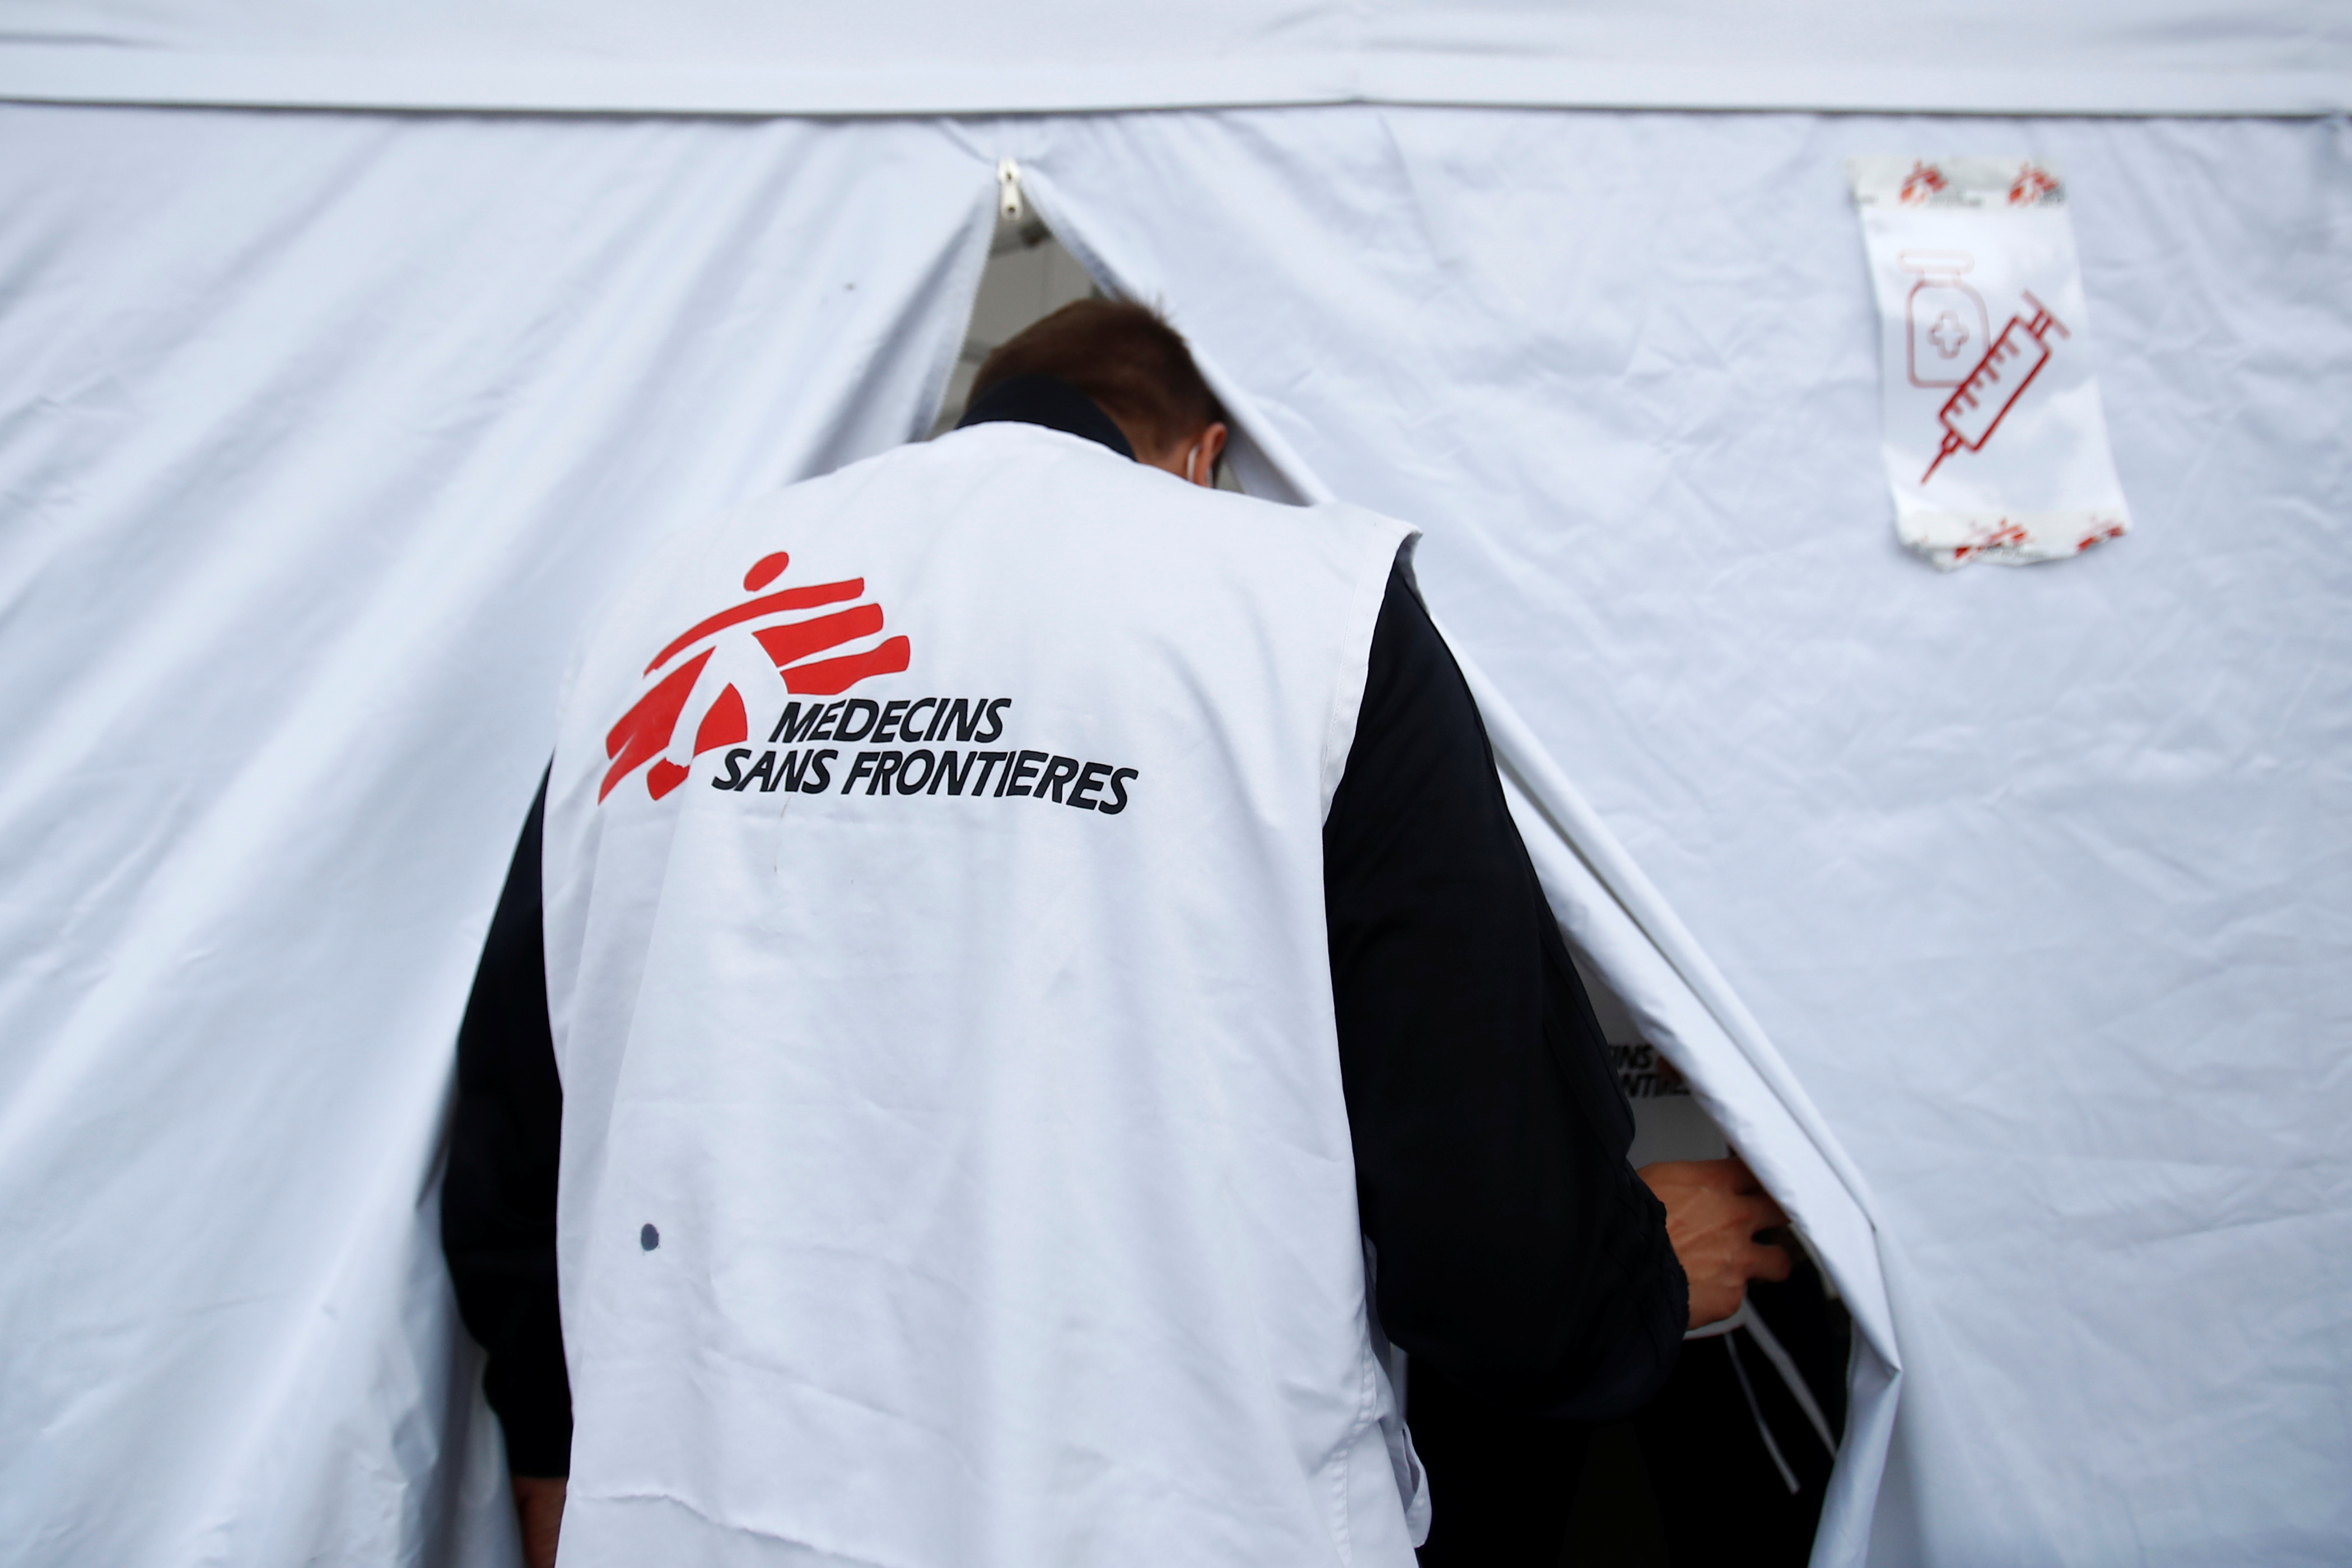 France's Medecins Sans Frontieres (MSF - Doctors Without Borders) vaccinates migrants and homeless people in Paris